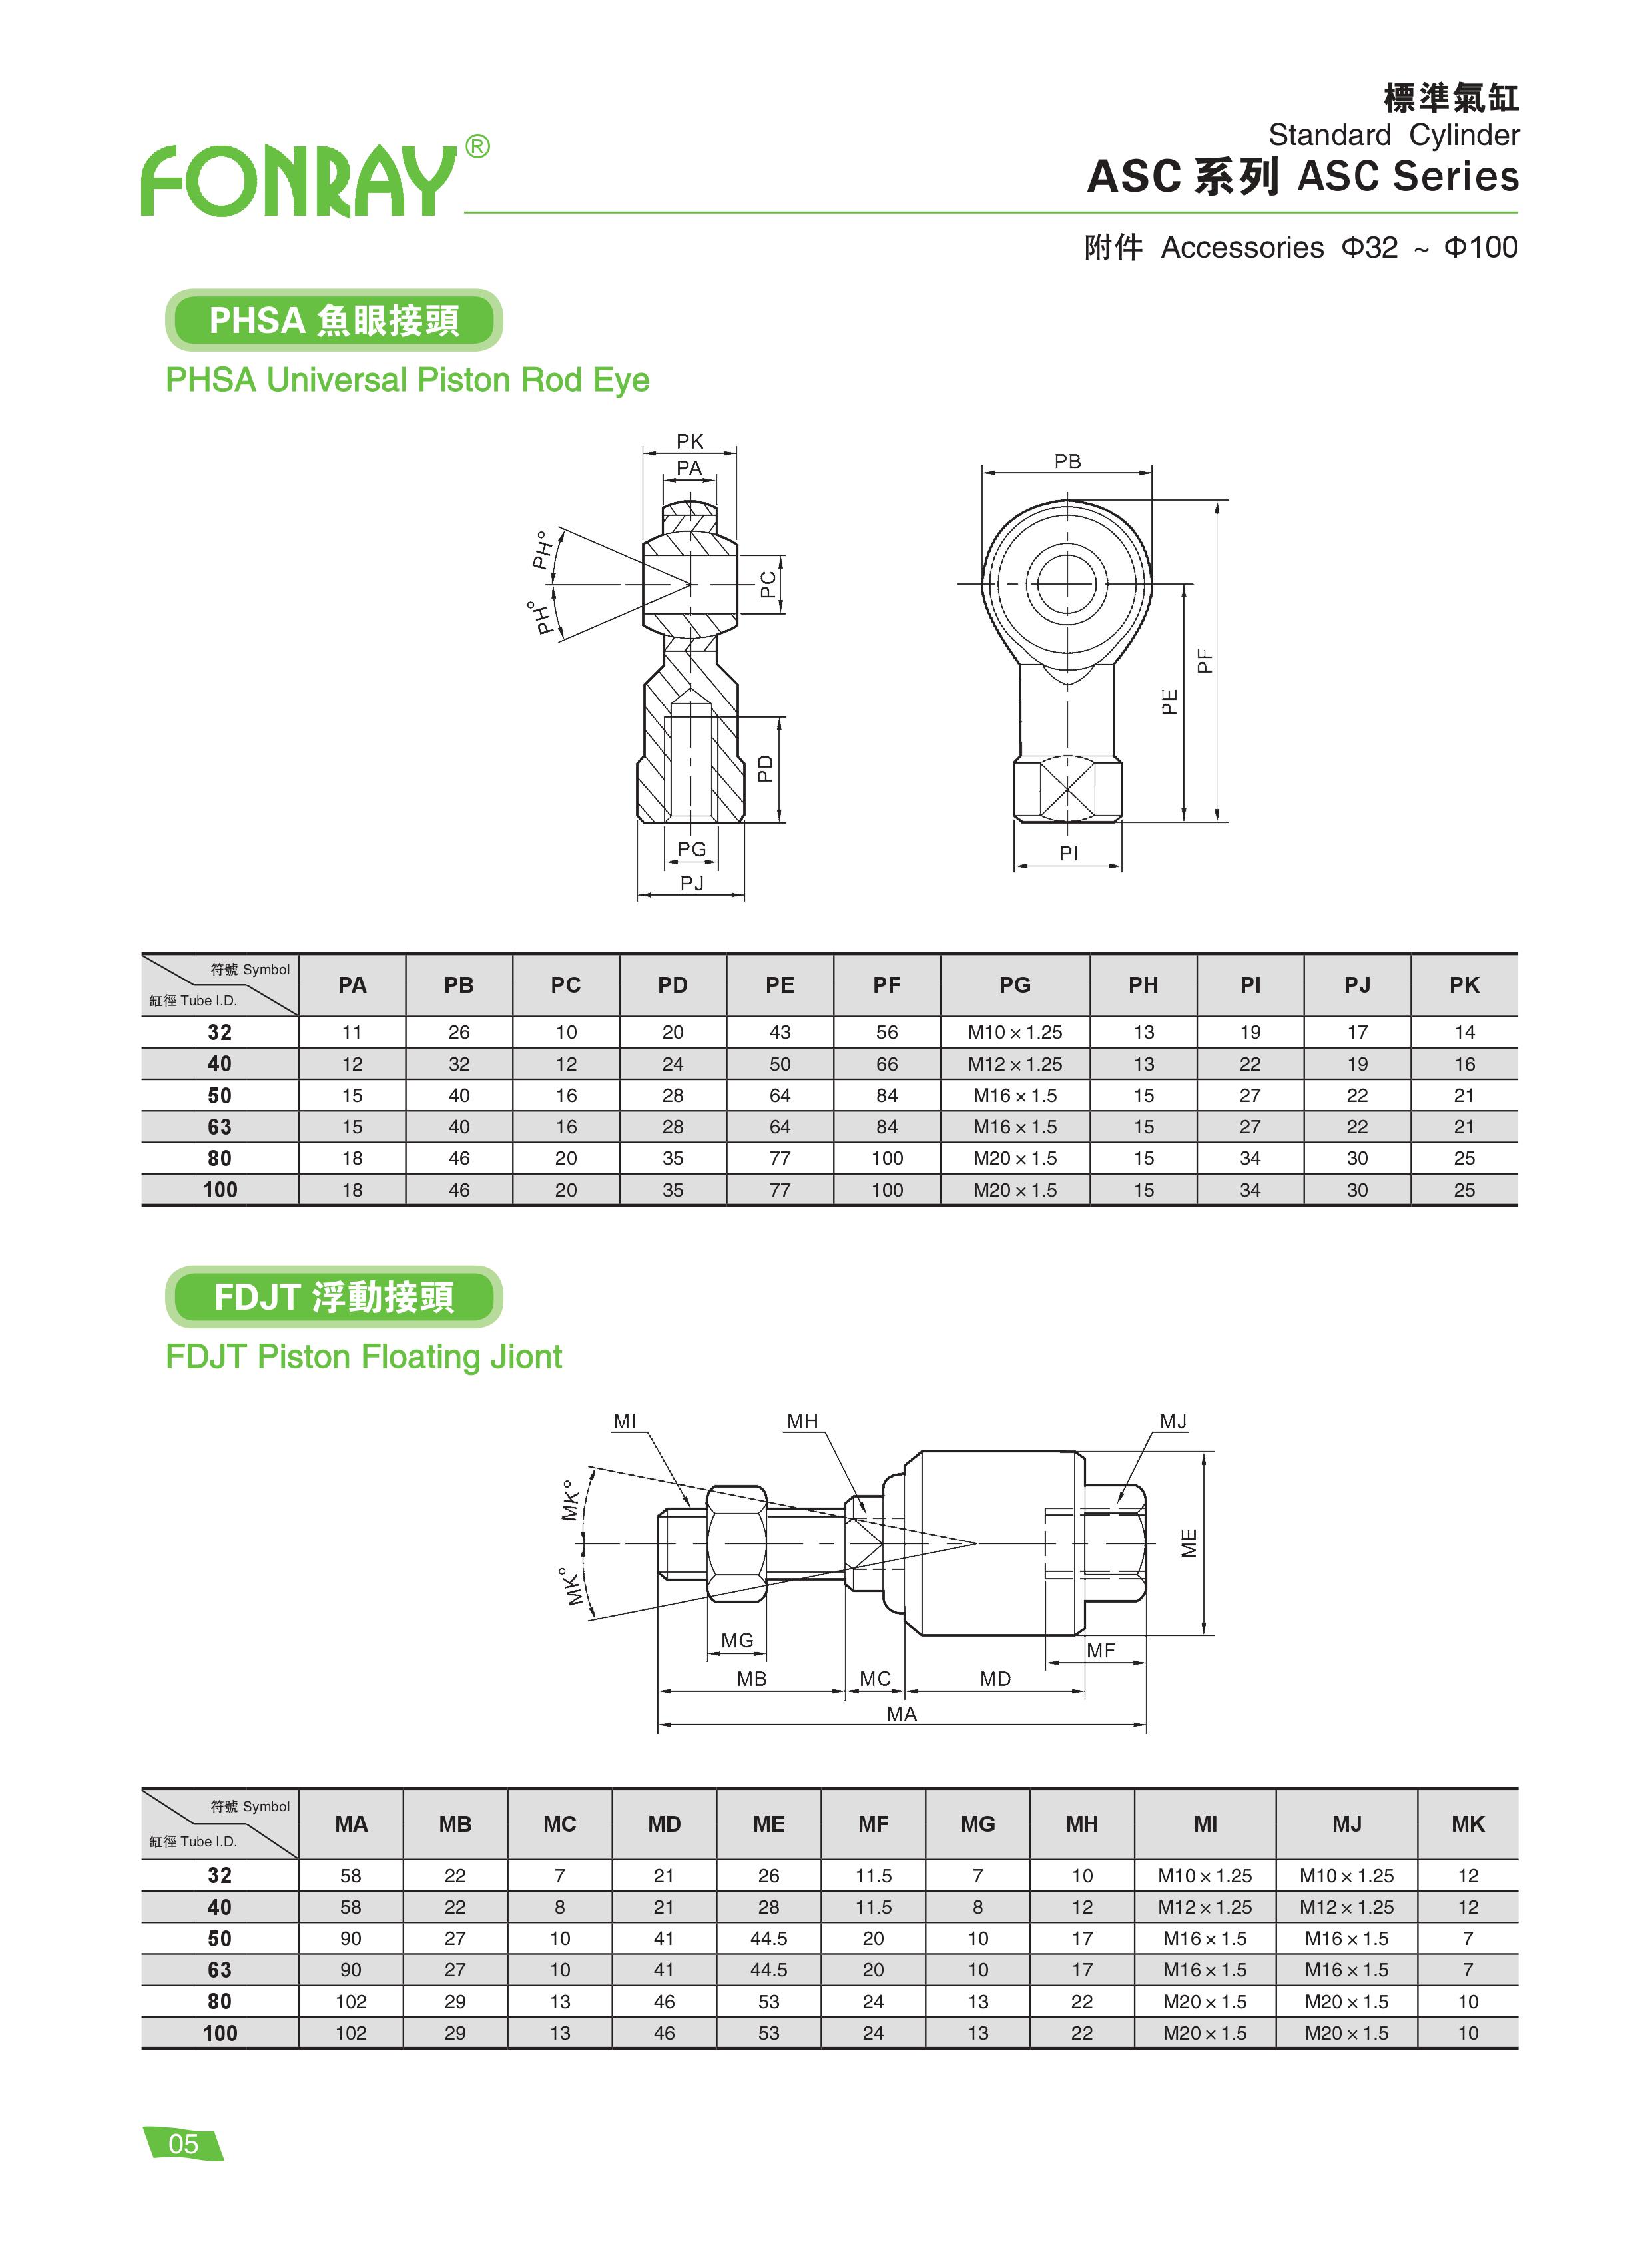 Standard Cylinders - ASC Standard Cylinders Accessories (Y、I、PHSA、FDJT)